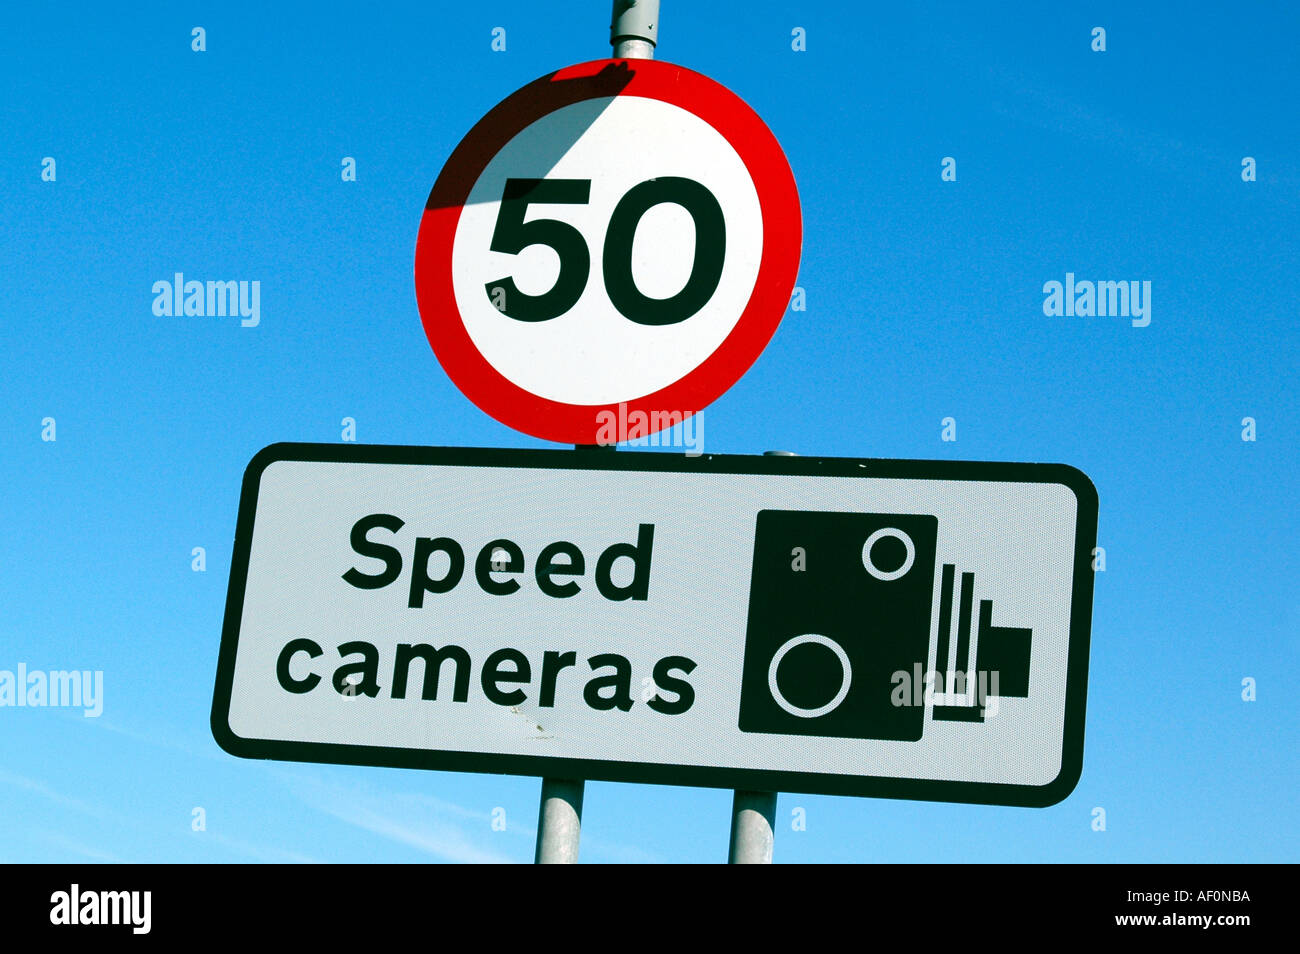 Speed limit road sign warning of speed cameras Stock Photo